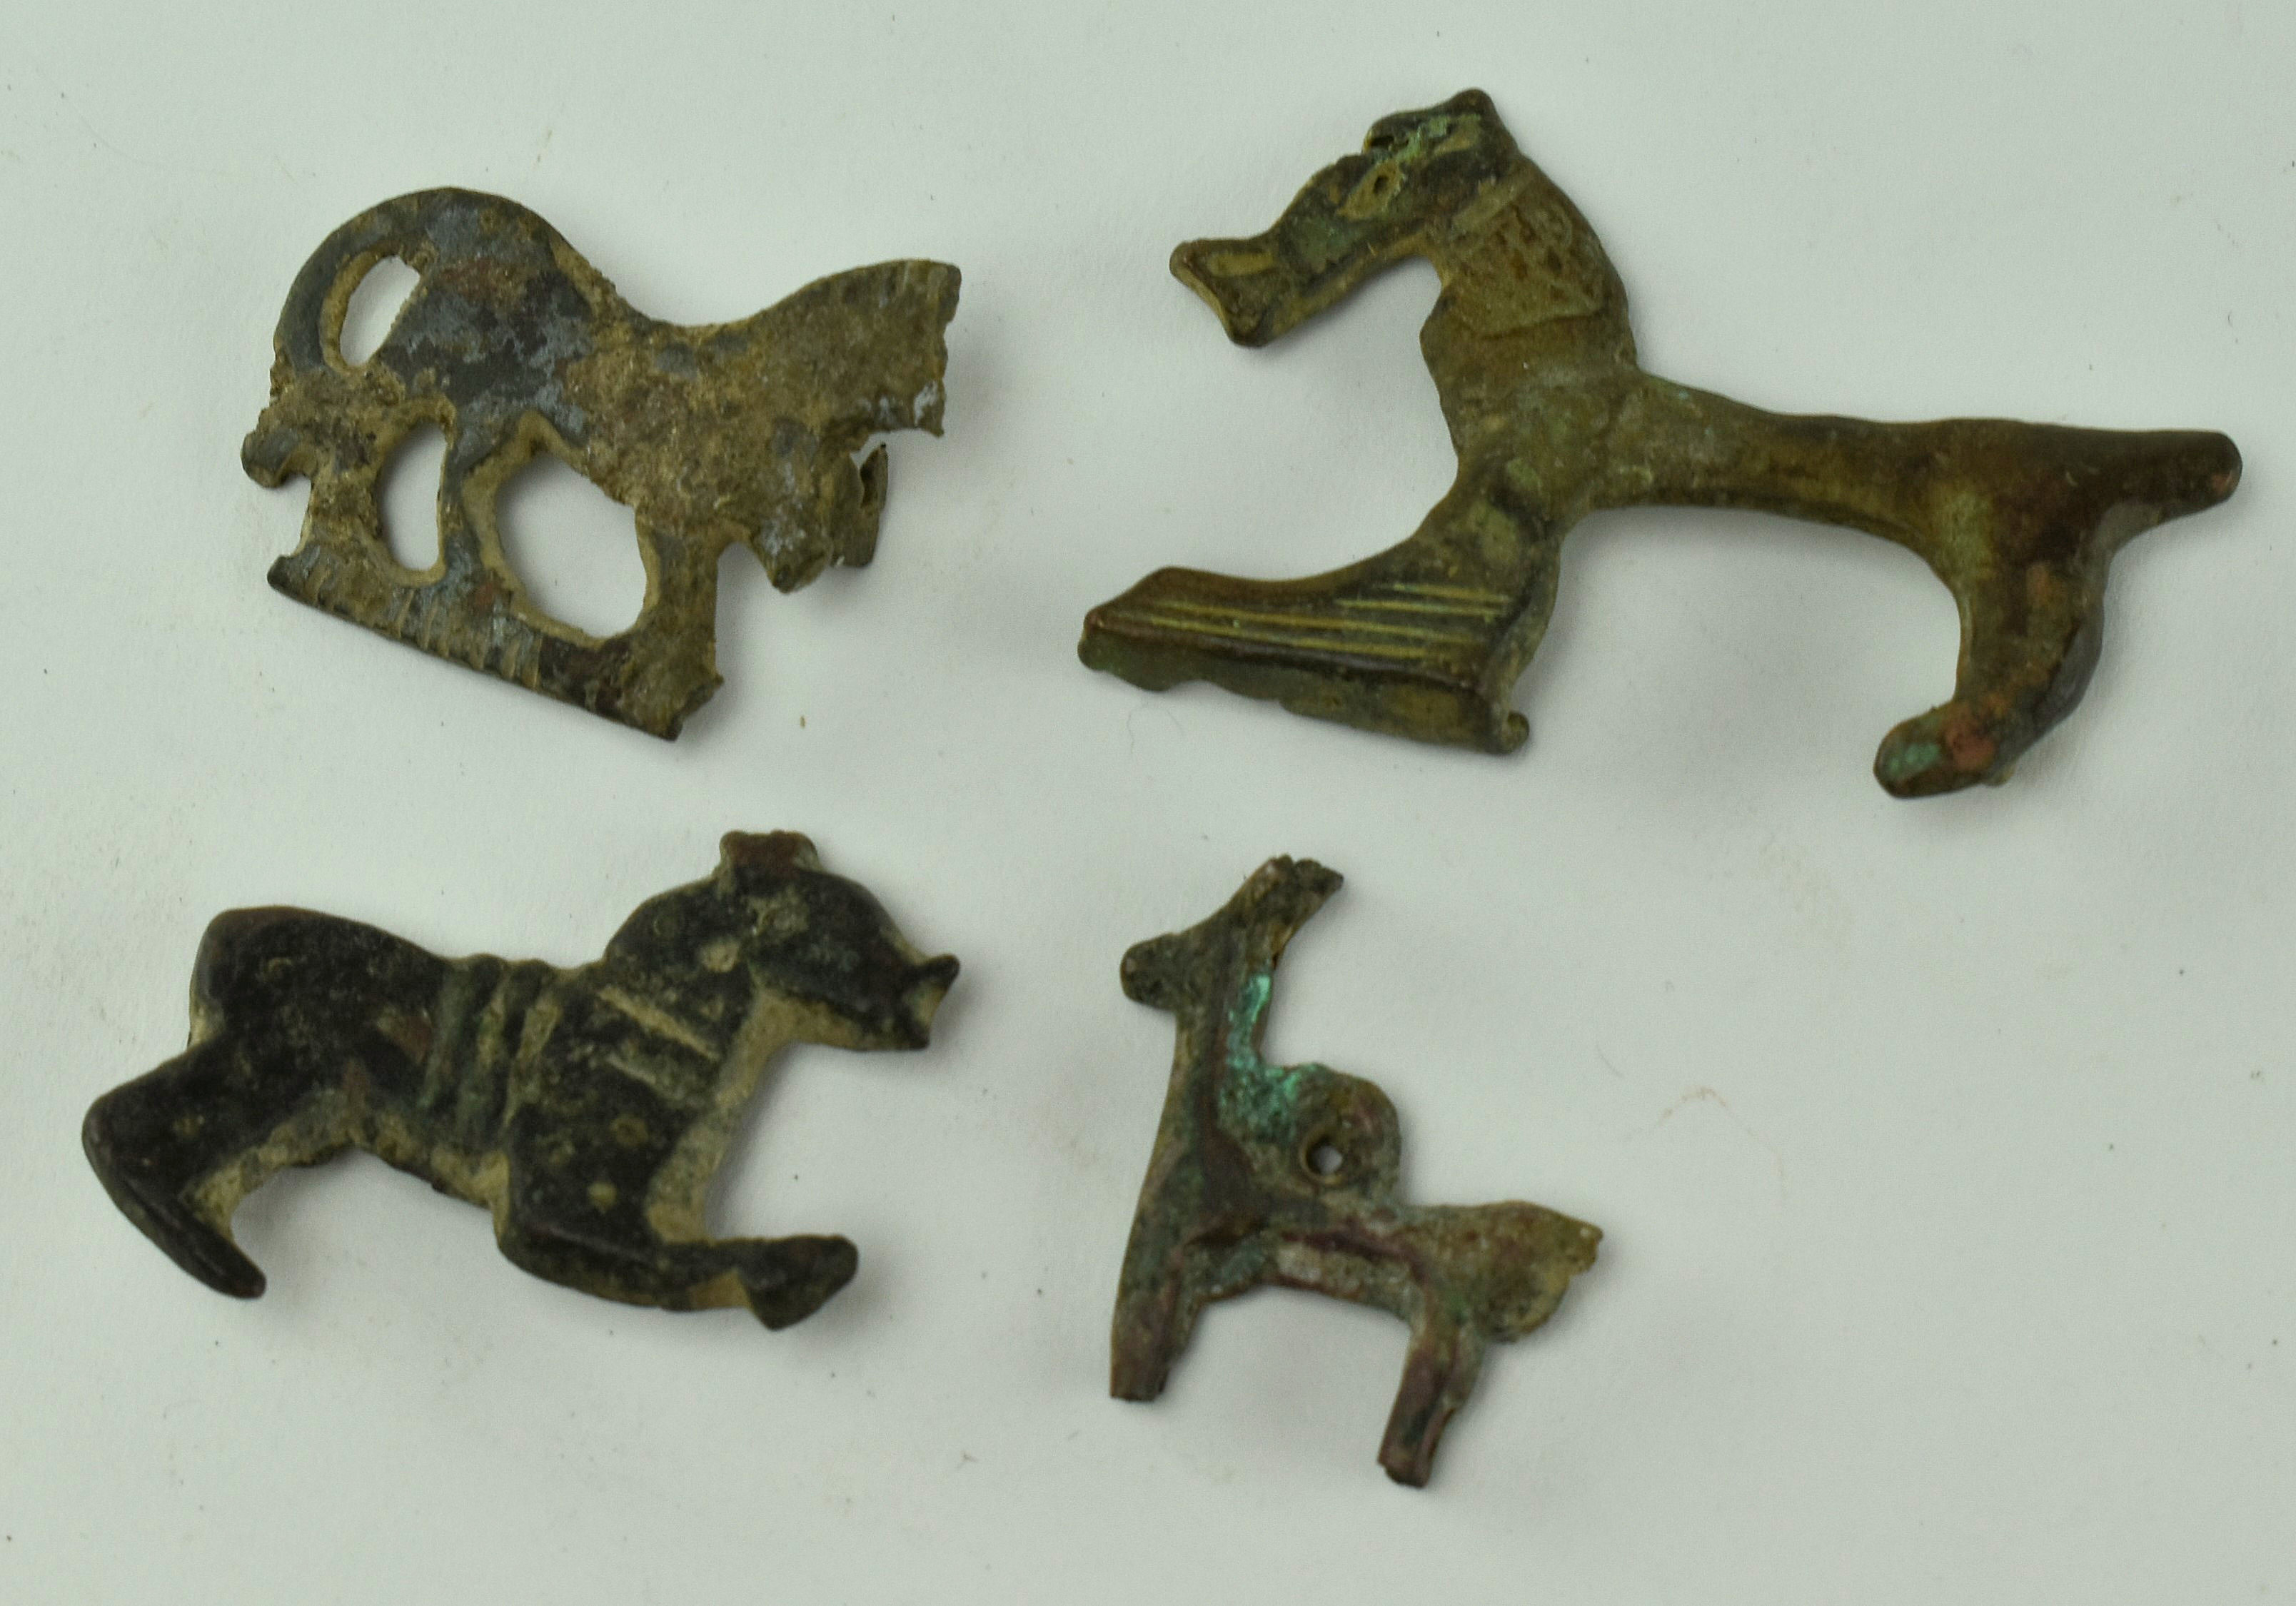 4 PIECES OF ANCIENT ROMAN BRONZE ANIMAL BROOCHES / FIGURINES